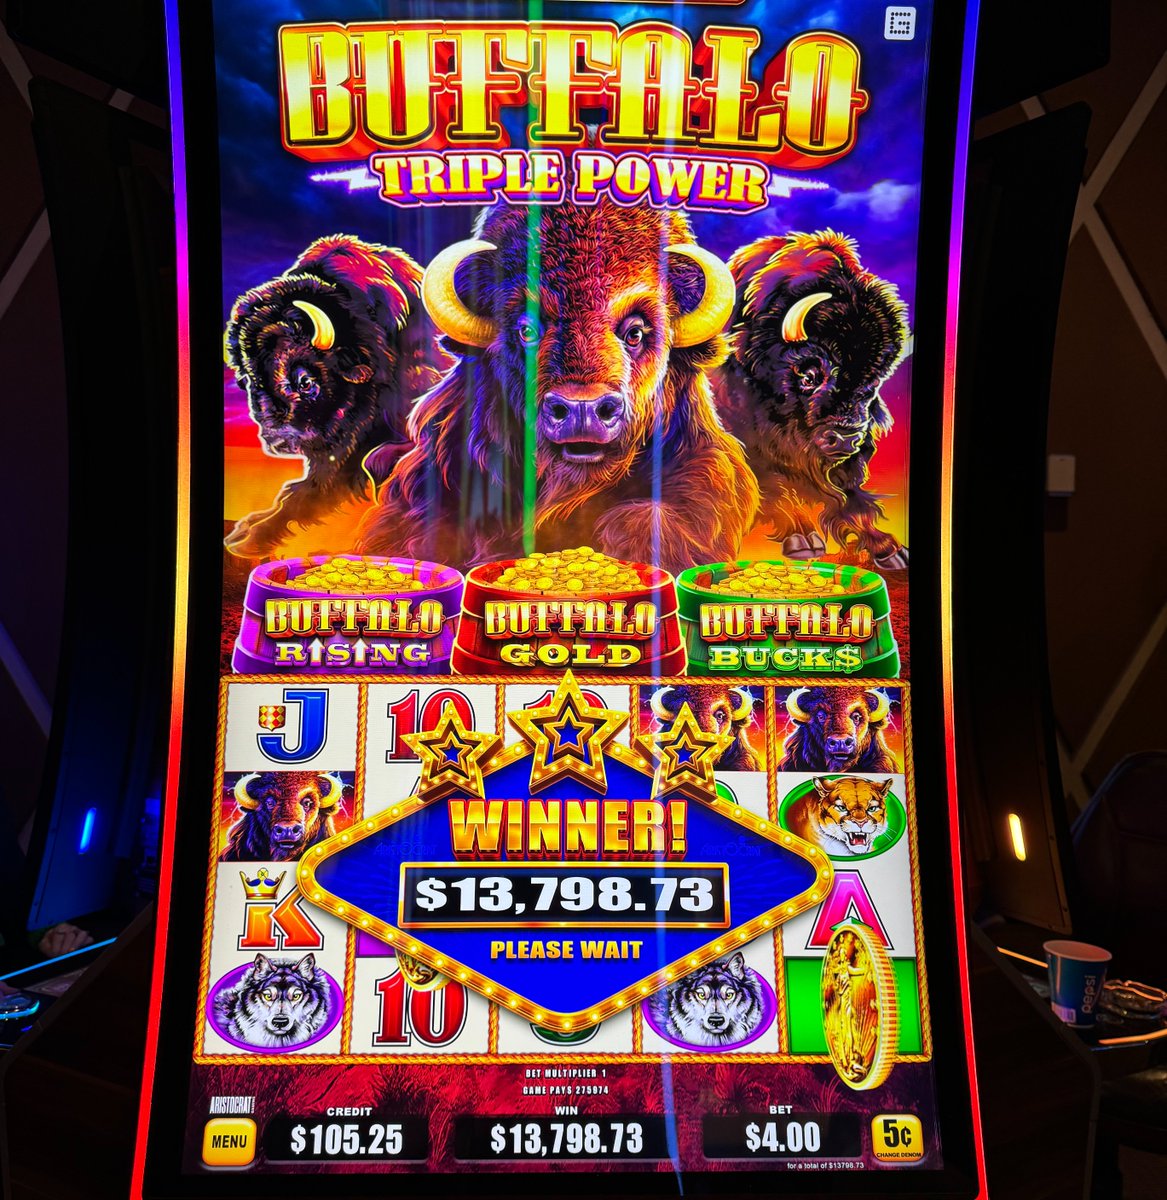 Way to go, BUFFALOOOOO! Congrats to this guest on their $13,798.73 jackpot playing @BelterraPark! #BelterraParkWinners #BoydWinners ▫️ ▫️ ▫️ ▫️ ▫️ ▫️ ▫️ Must be 21+. Gambling problem? Call the Ohio Problem Gambling Helpline at 1-800-589-9966